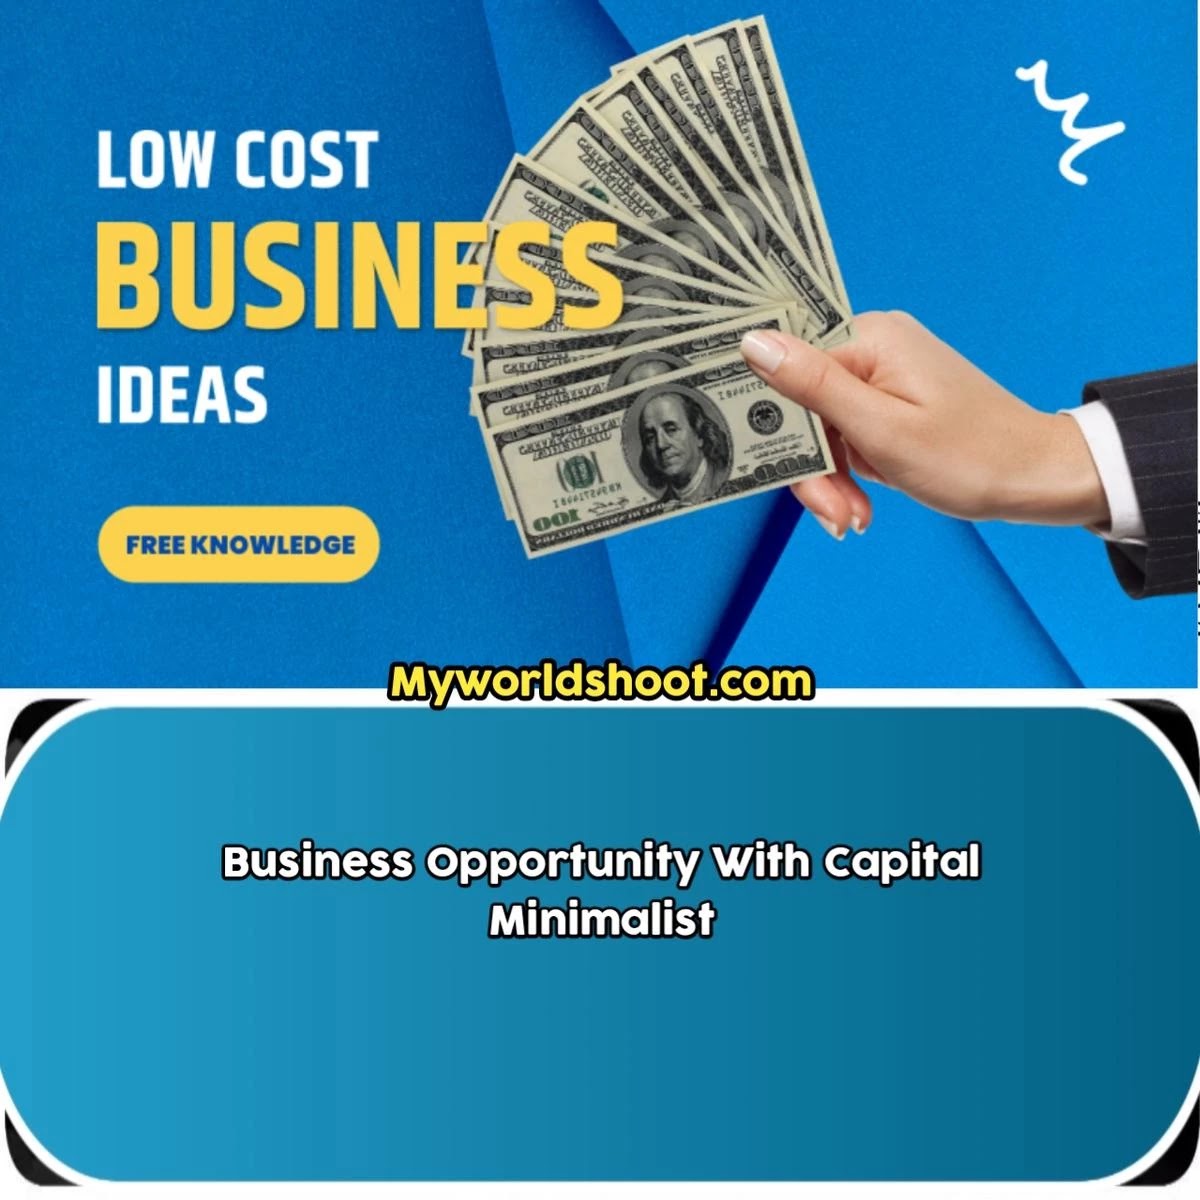 Business Opportunity With Minimal Capital